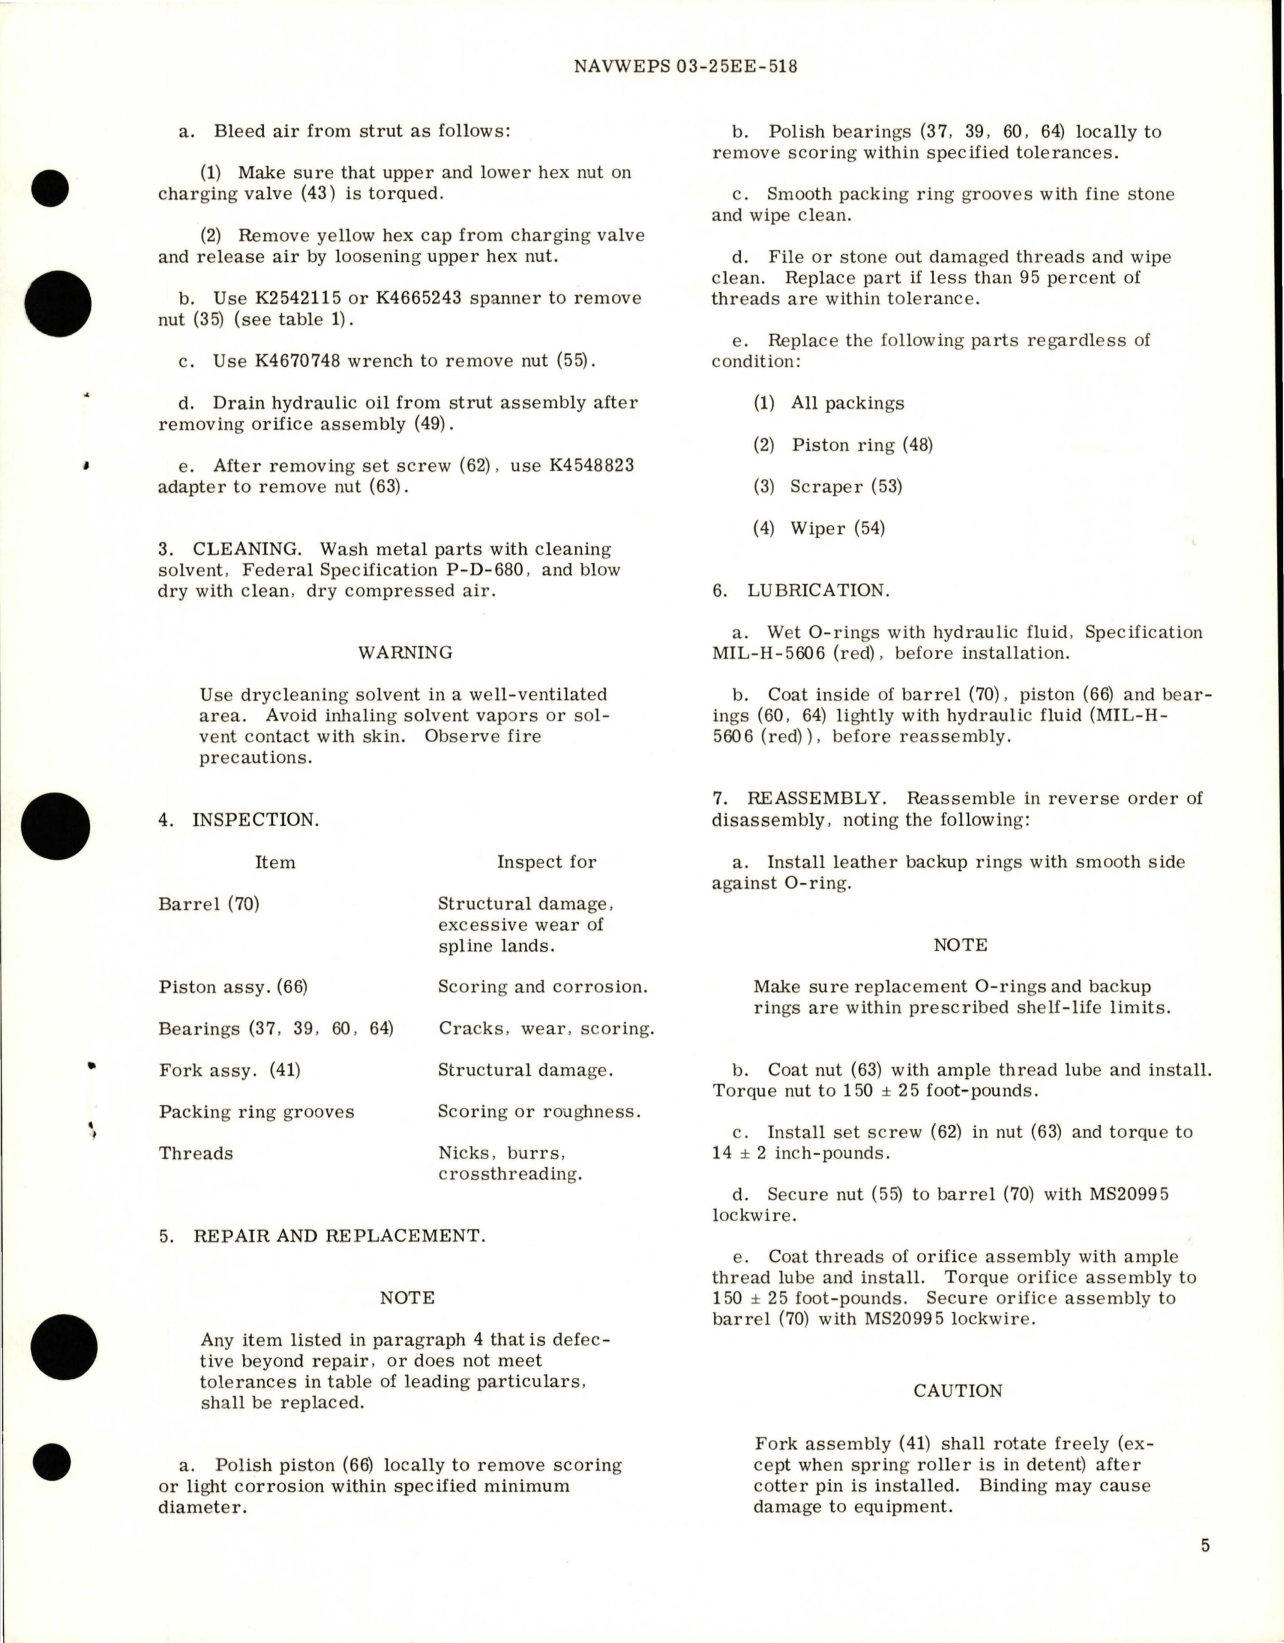 Sample page 5 from AirCorps Library document: Overhaul Instructions with Parts Breakdown for 18-Inch Stroke Nose Landing Gear Strut Assembly